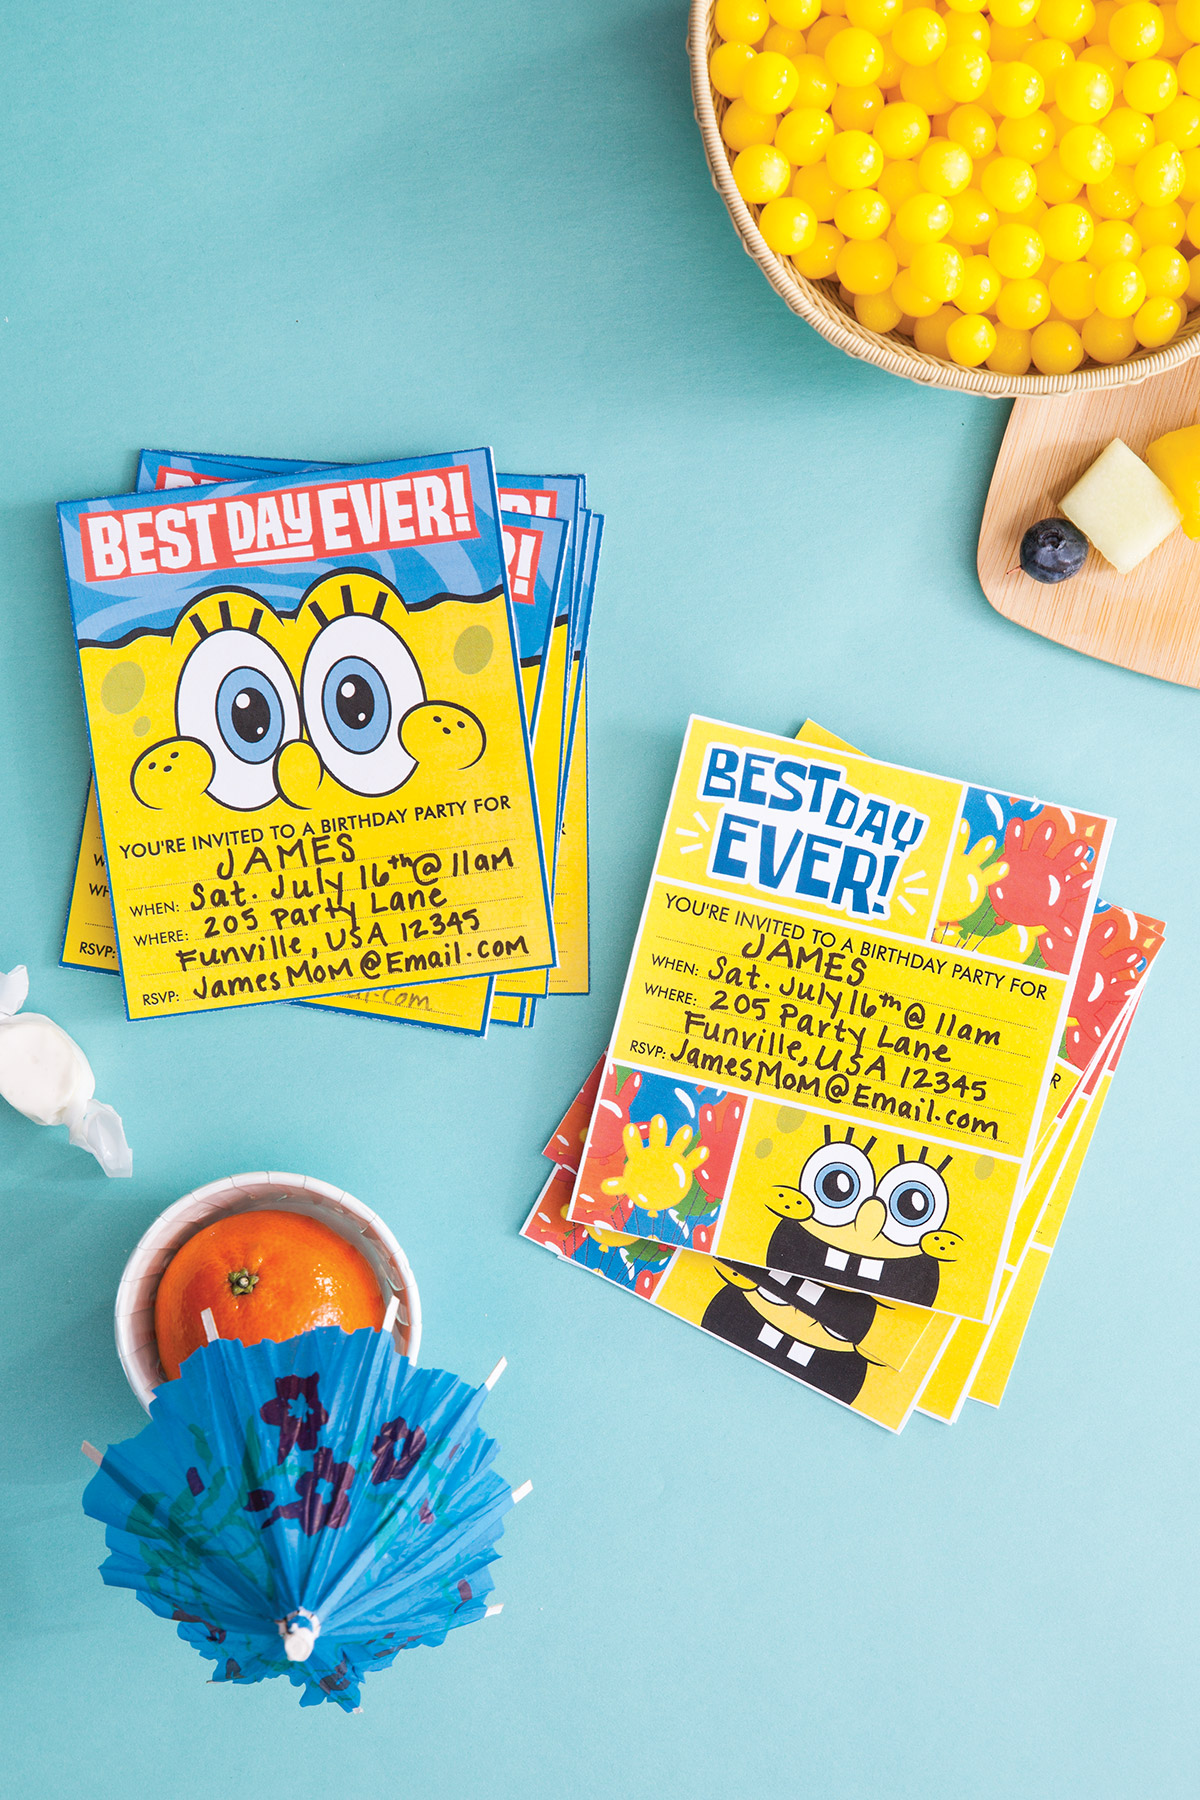 SpongeBob "Best Day Ever!" Party Invitations